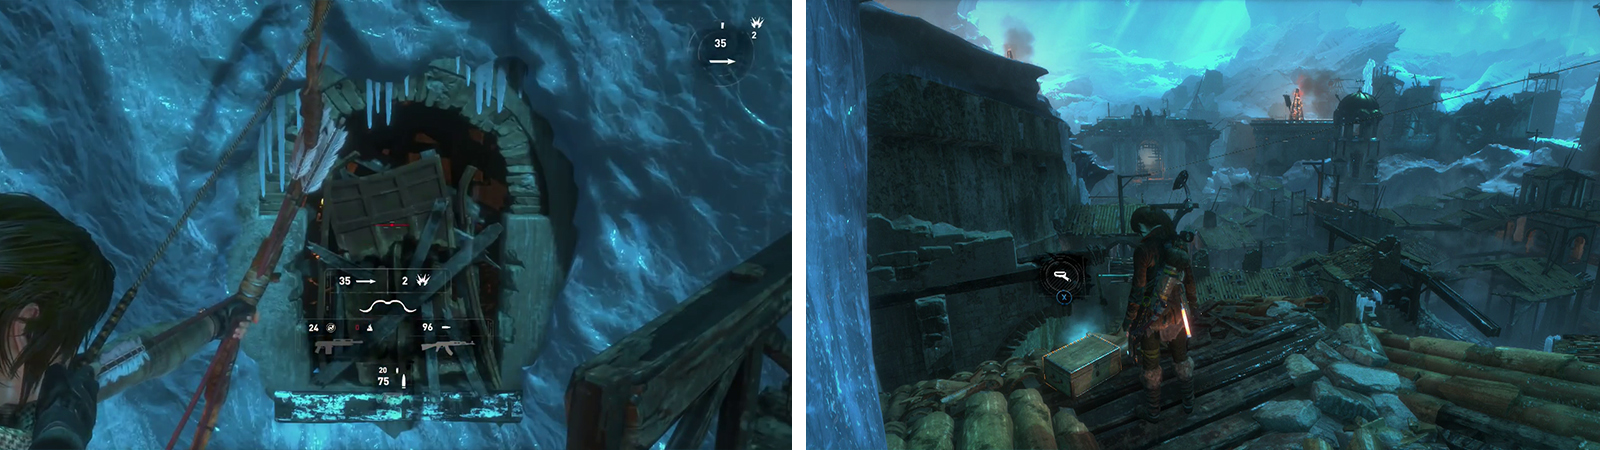 Destroy the barricade by the trebuchet (left). Head inside and hop out the other window to find Relic 06 (right).